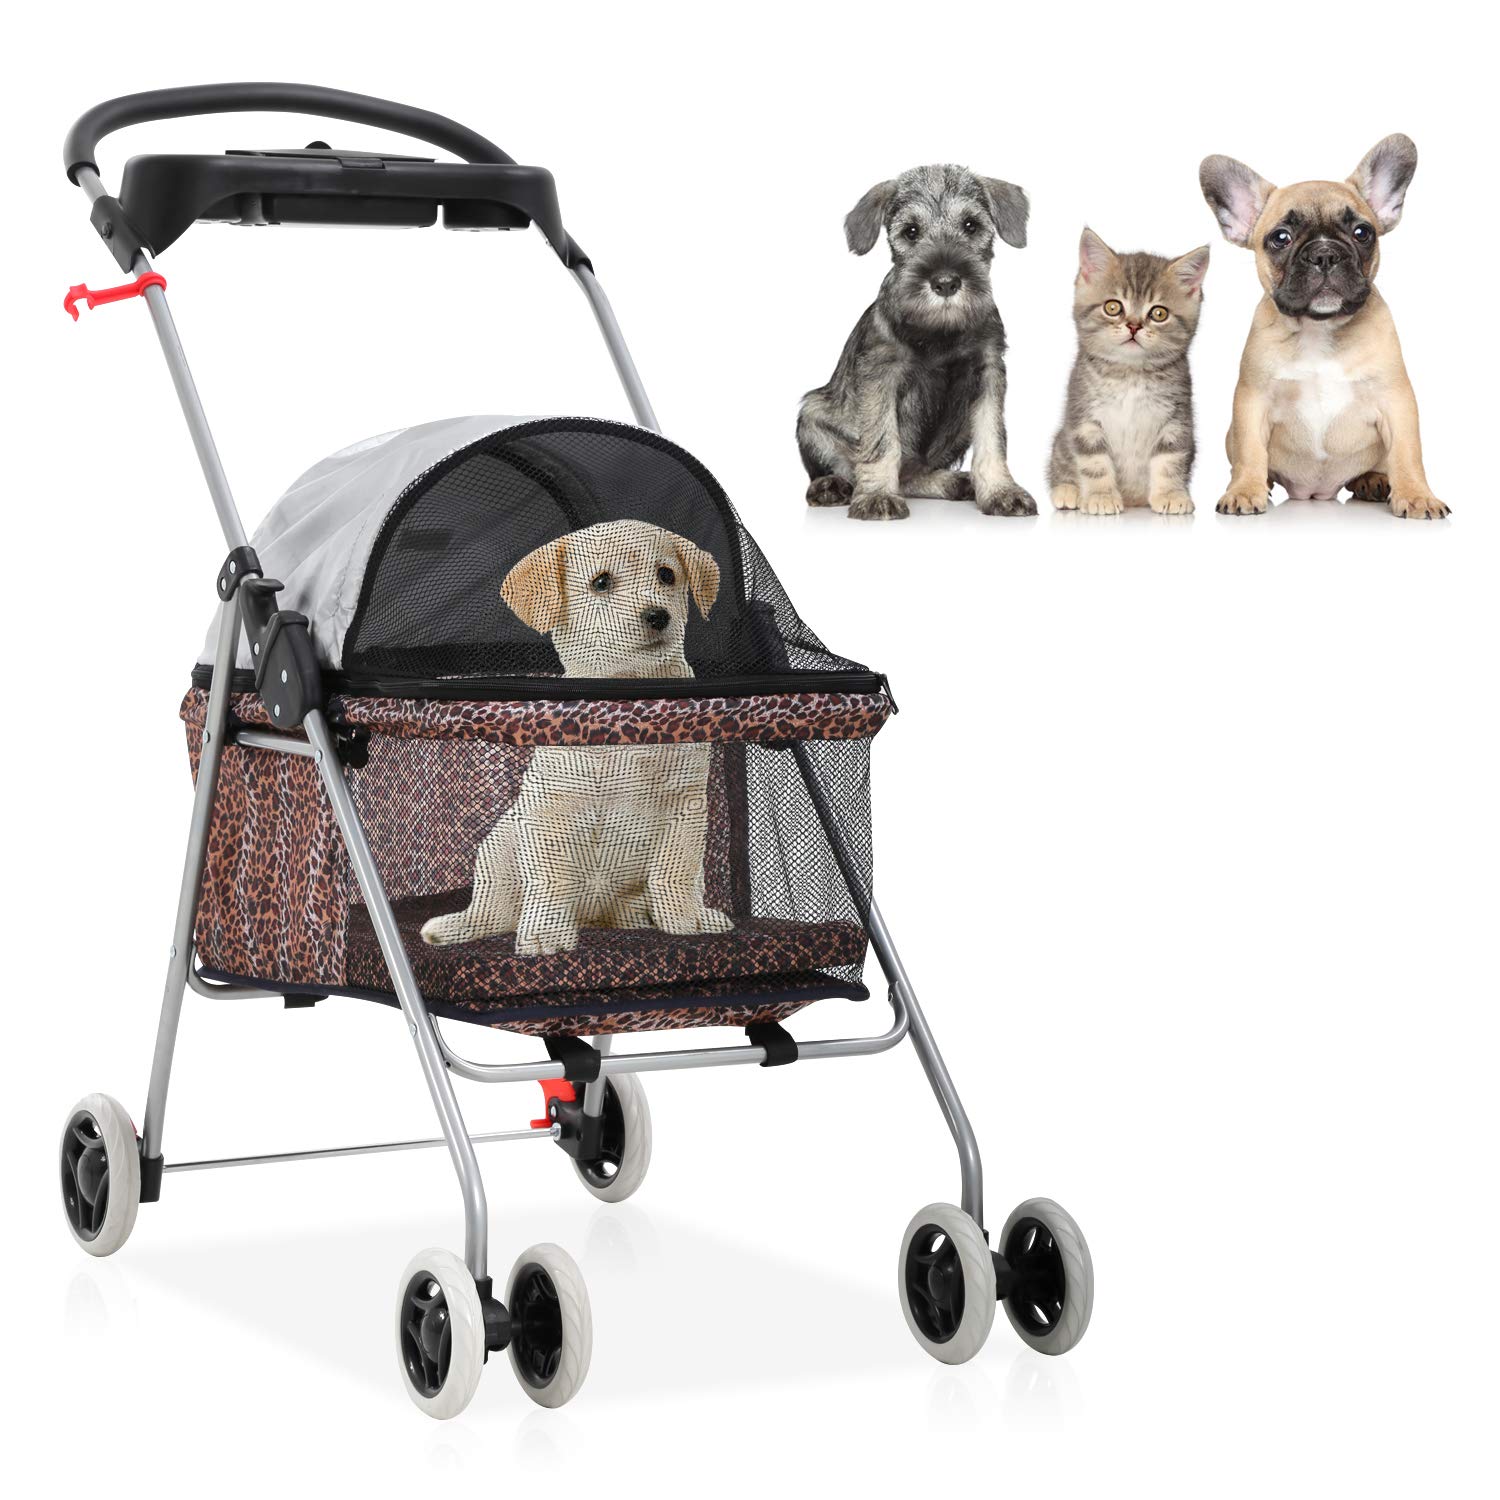 Meet perfect Pet Stroller - MeetPerfect Luxury Pet Roadster for Dogs and cats Waterproof Dog cart Dog Stroller cat Stroller Pet Jogger - Easy